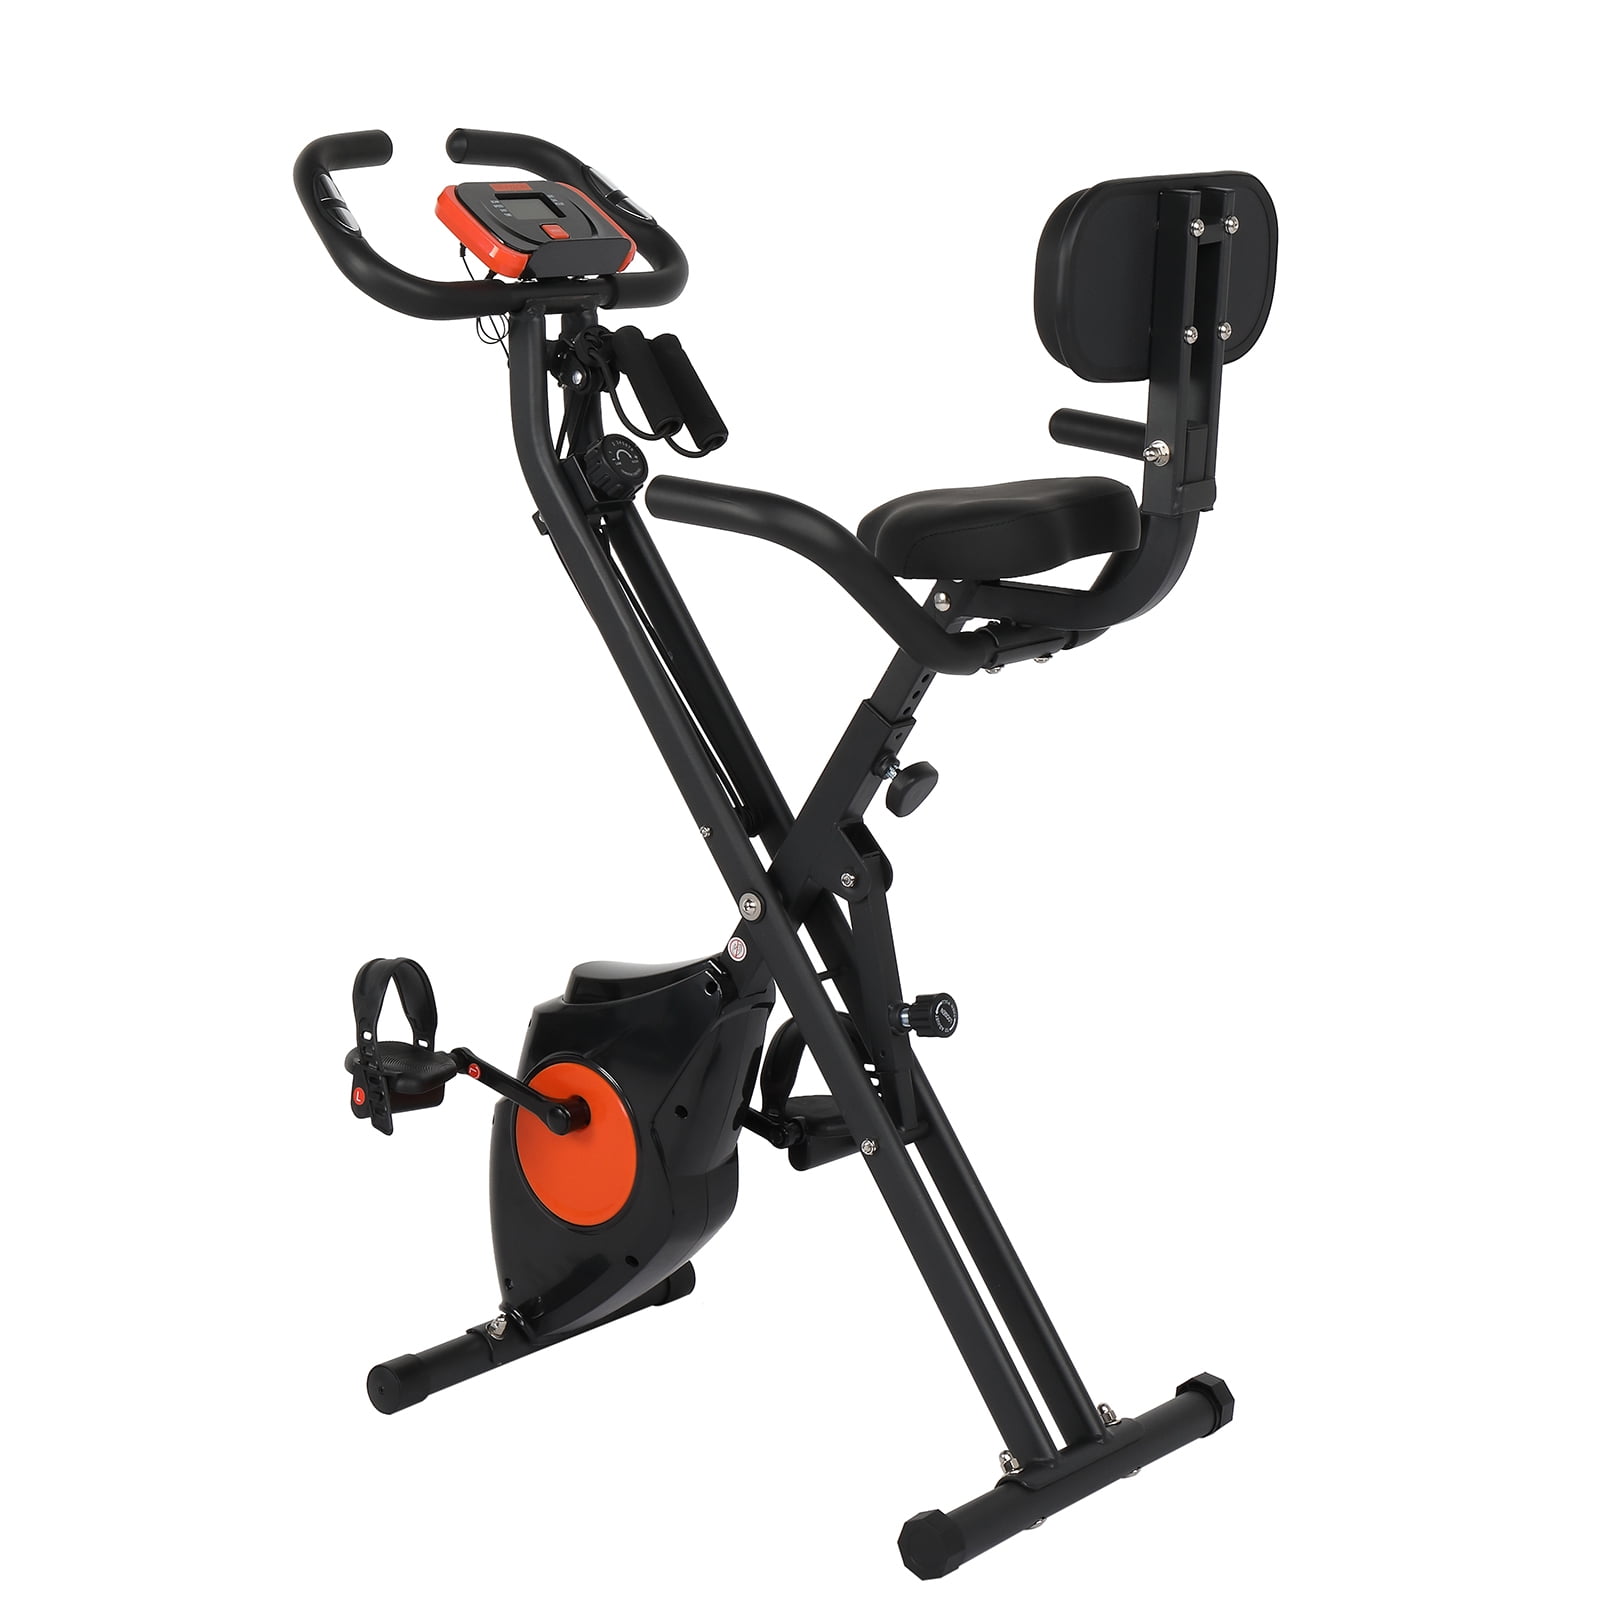 Details about   Gym Cardio Folding Exercise Bike Fitness Workout Home Indoor Trainer Ultra Quiet 